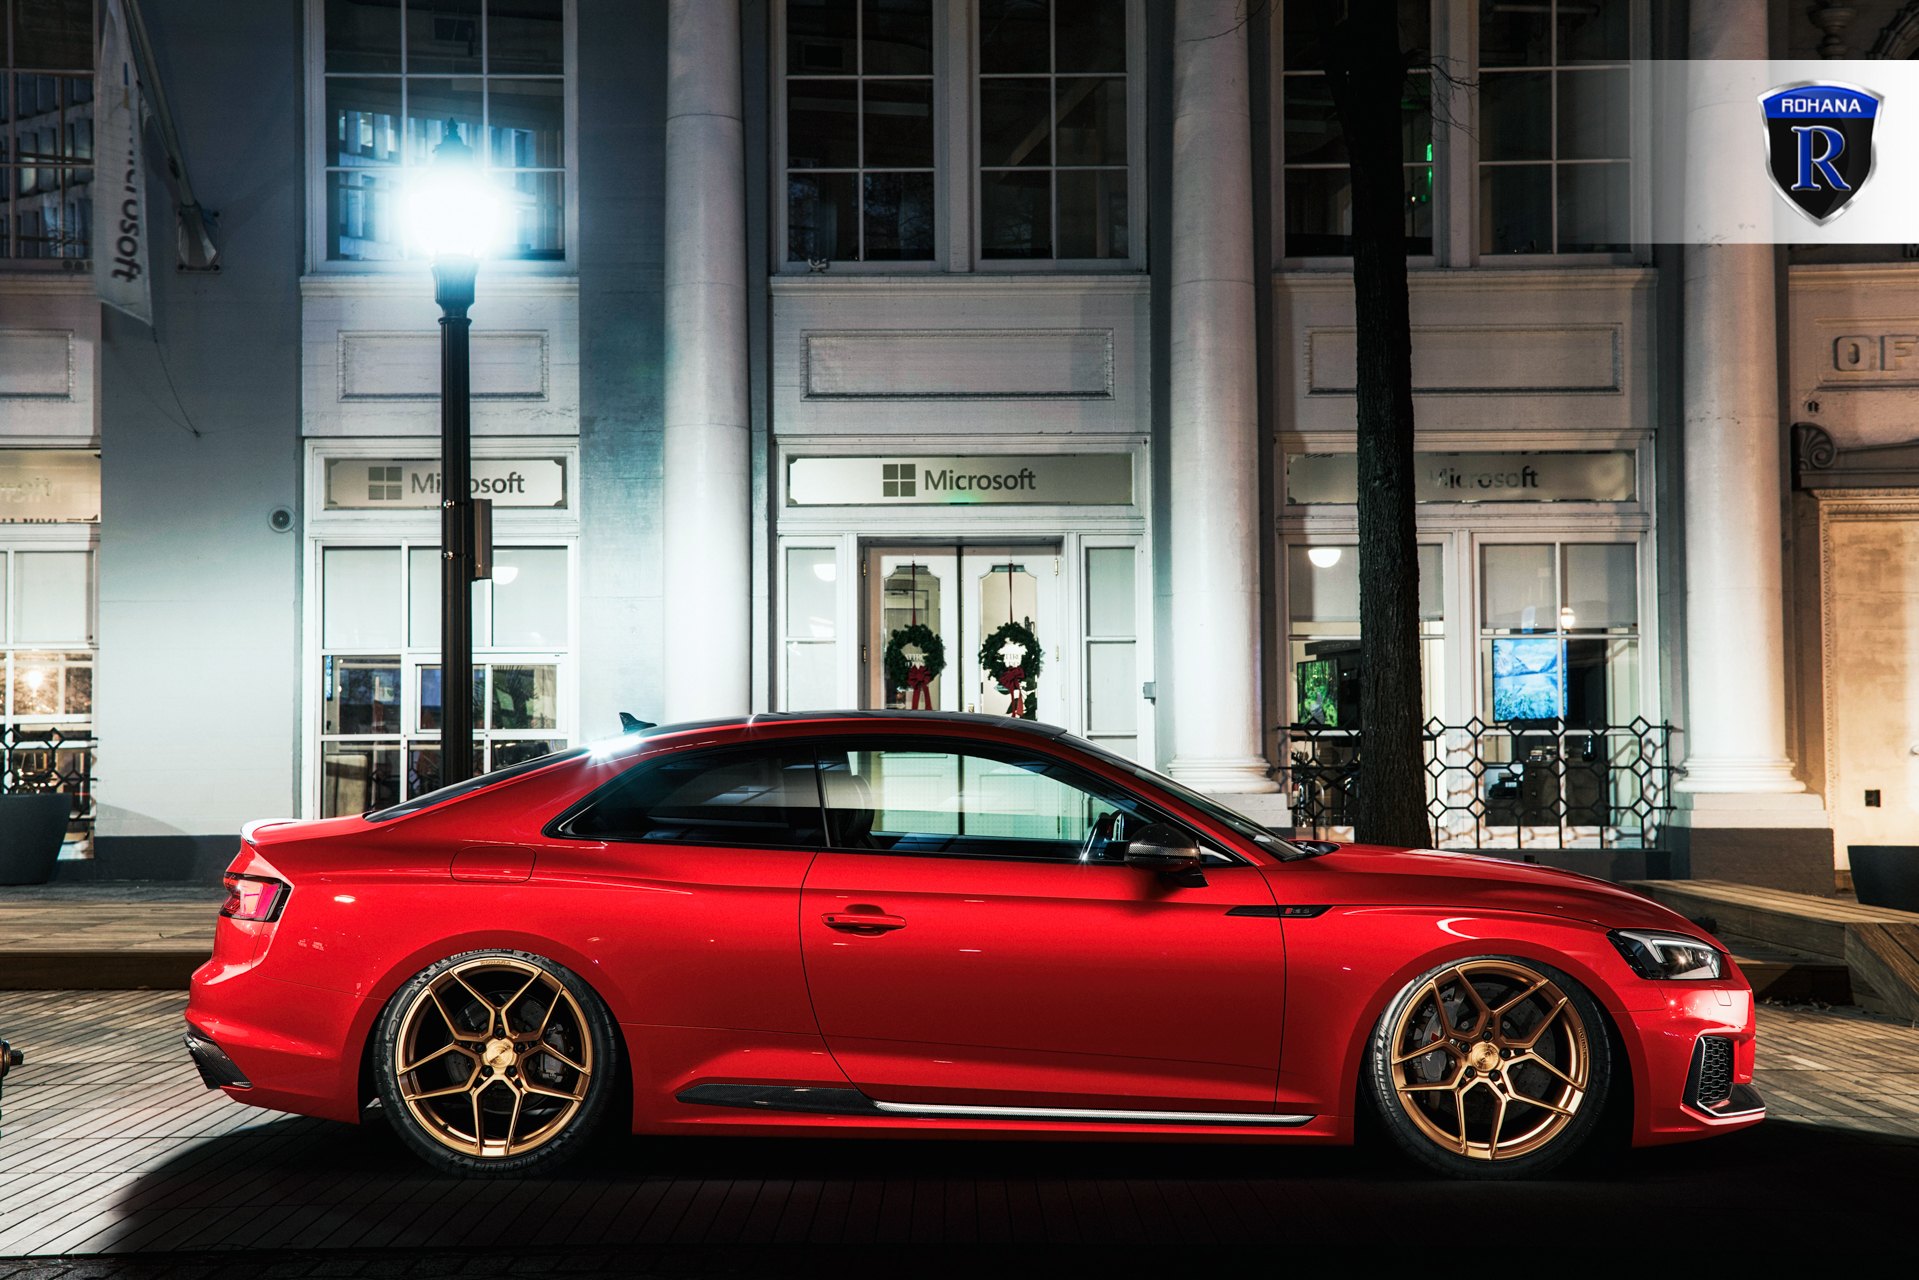 Aftermarket Side Skirts on Red Audi S5 - Photo by Rohana Wheels